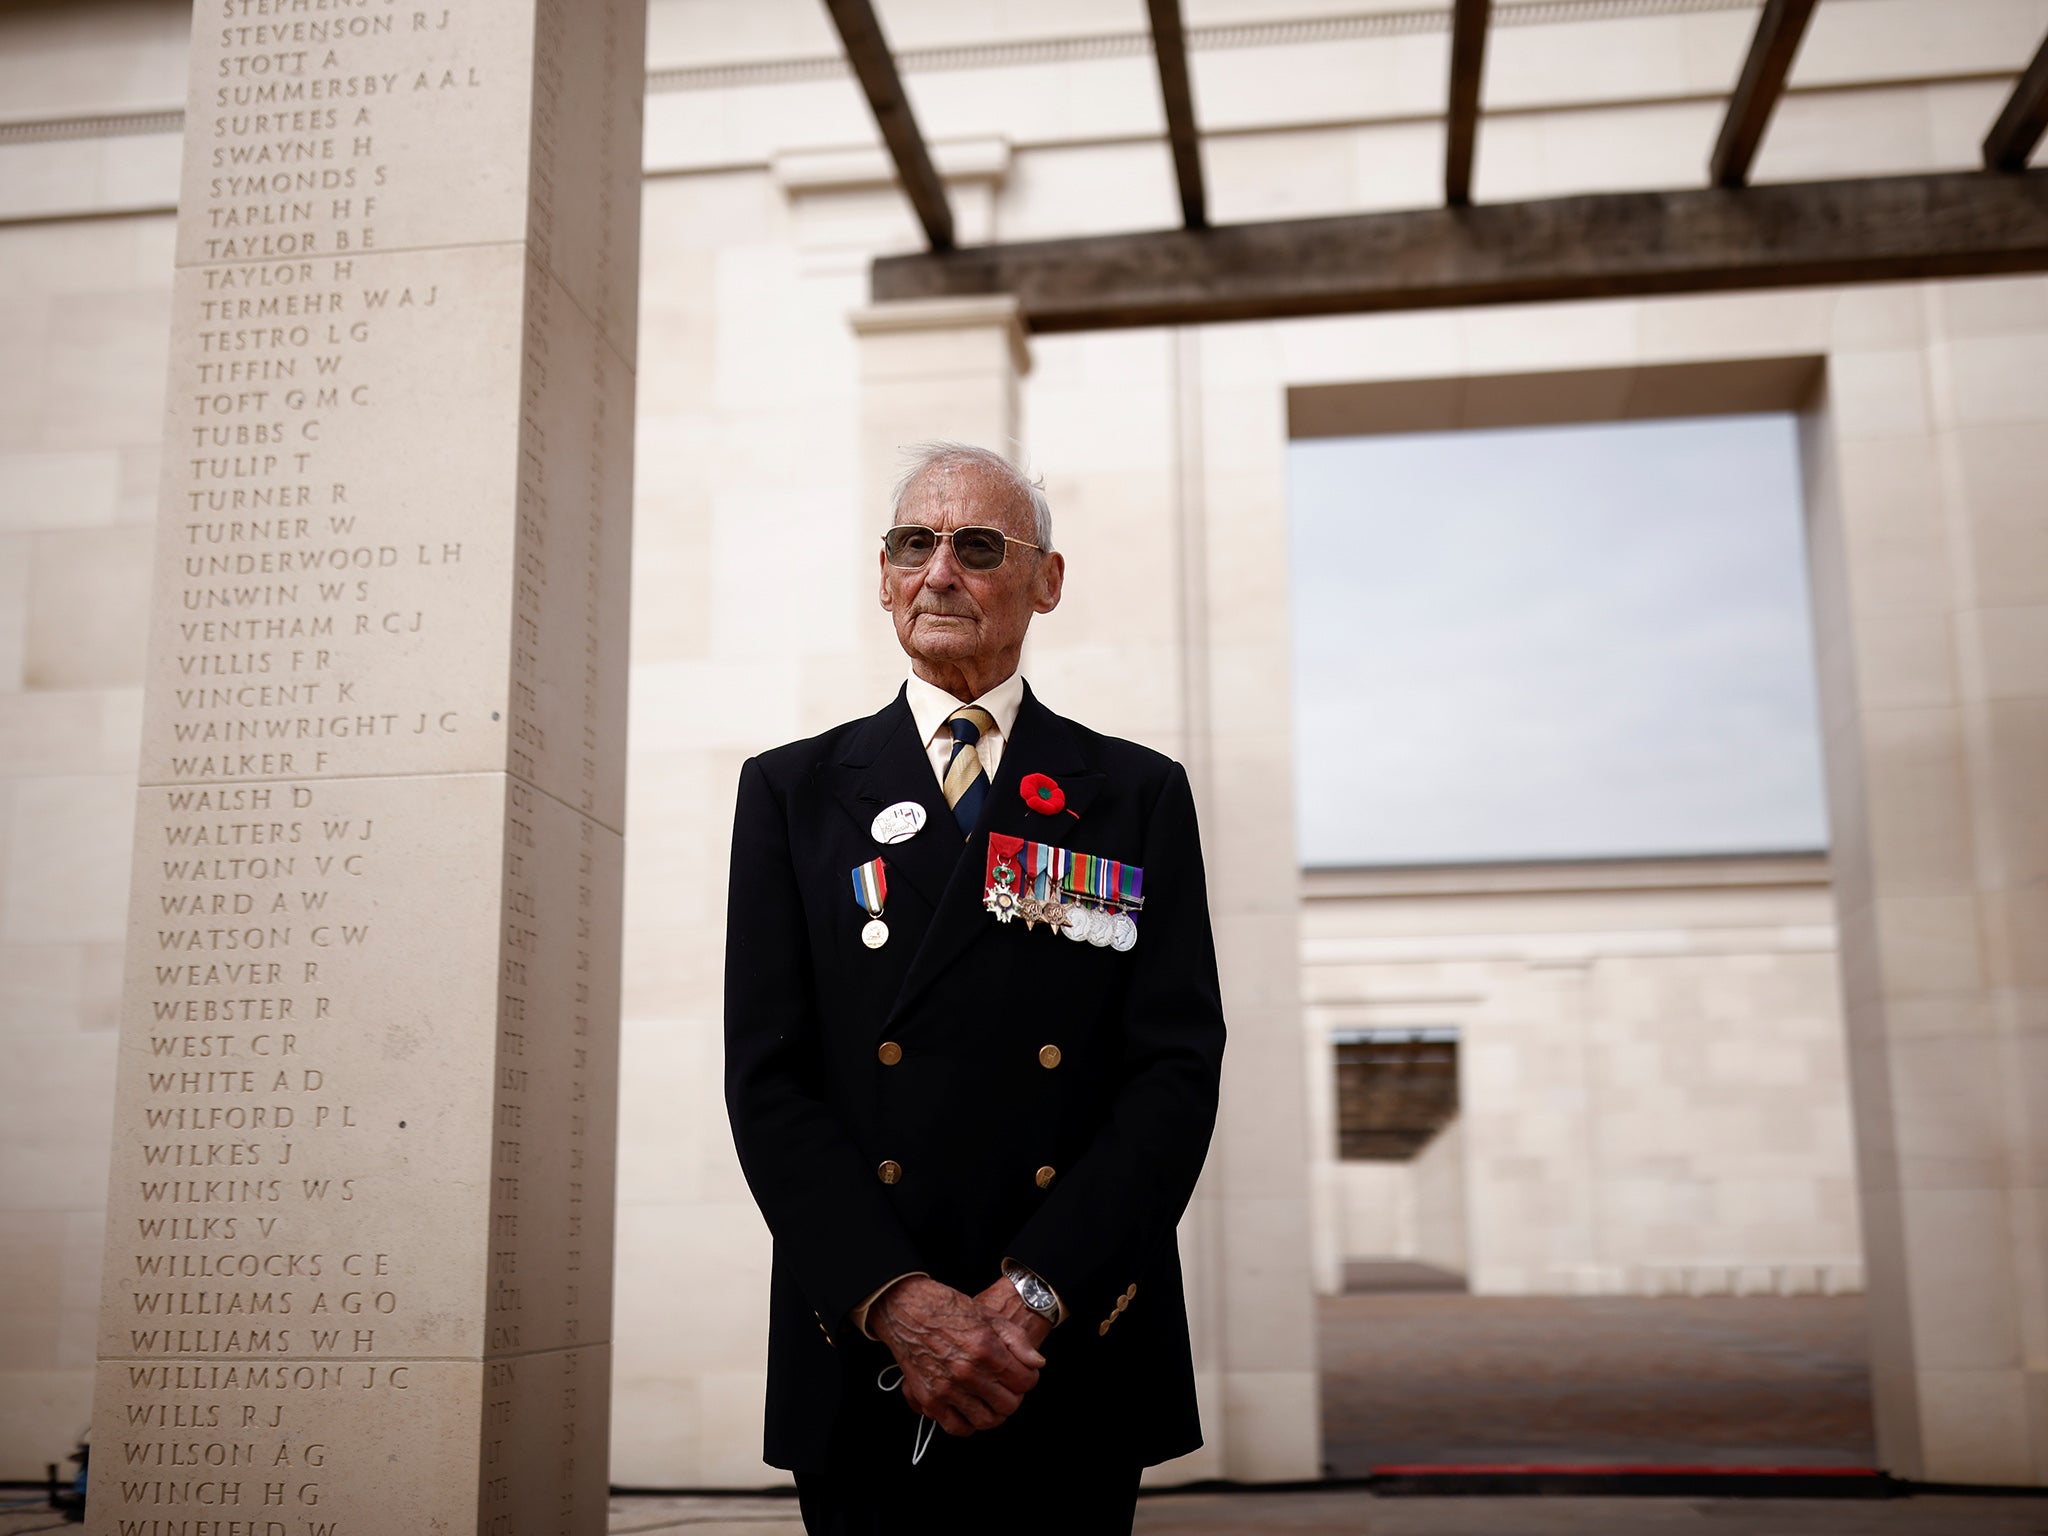 The veteran in Normandy at the site of the memorial